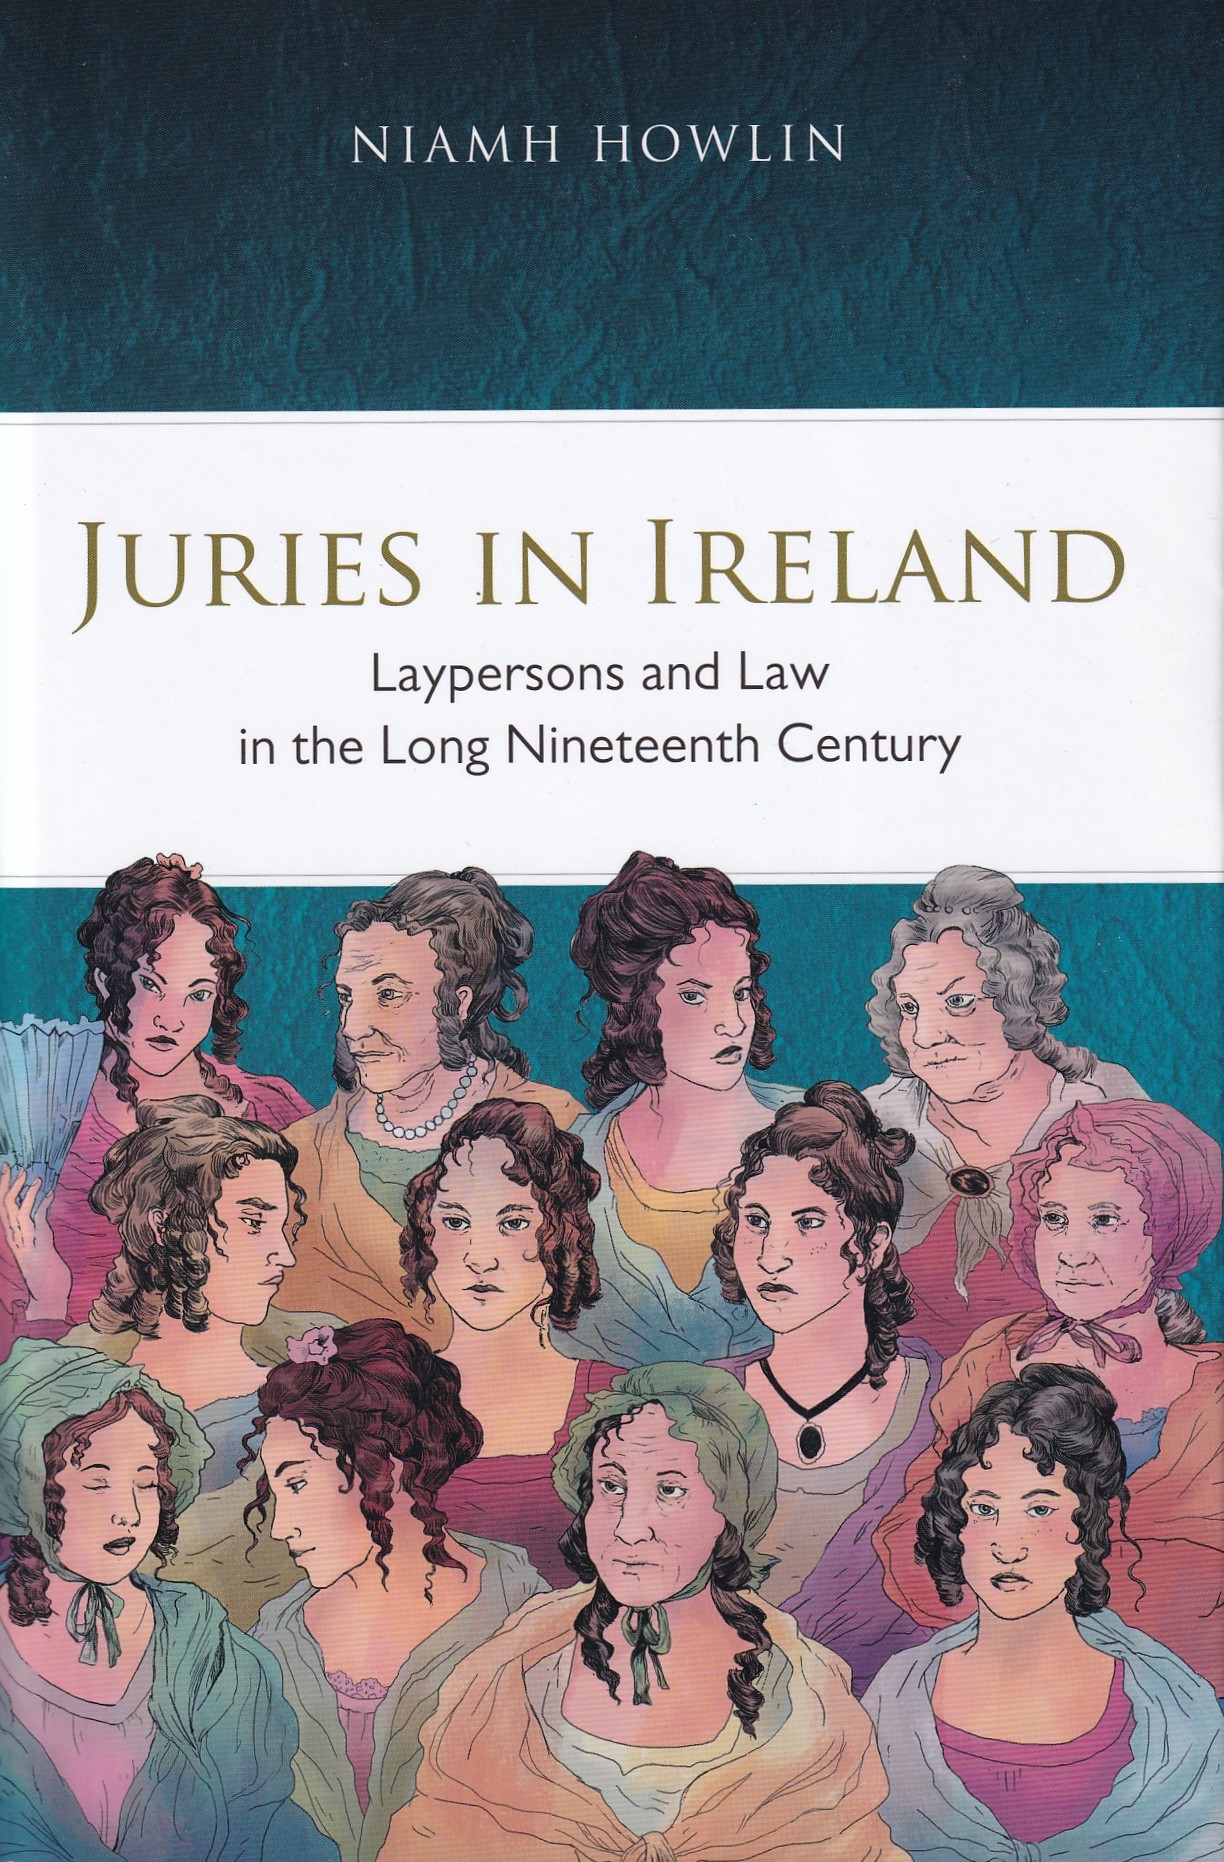 Juries in Ireland: Laypersons and Law in the Long Nineteenth Century | Niamh Howlin | Charlie Byrne's